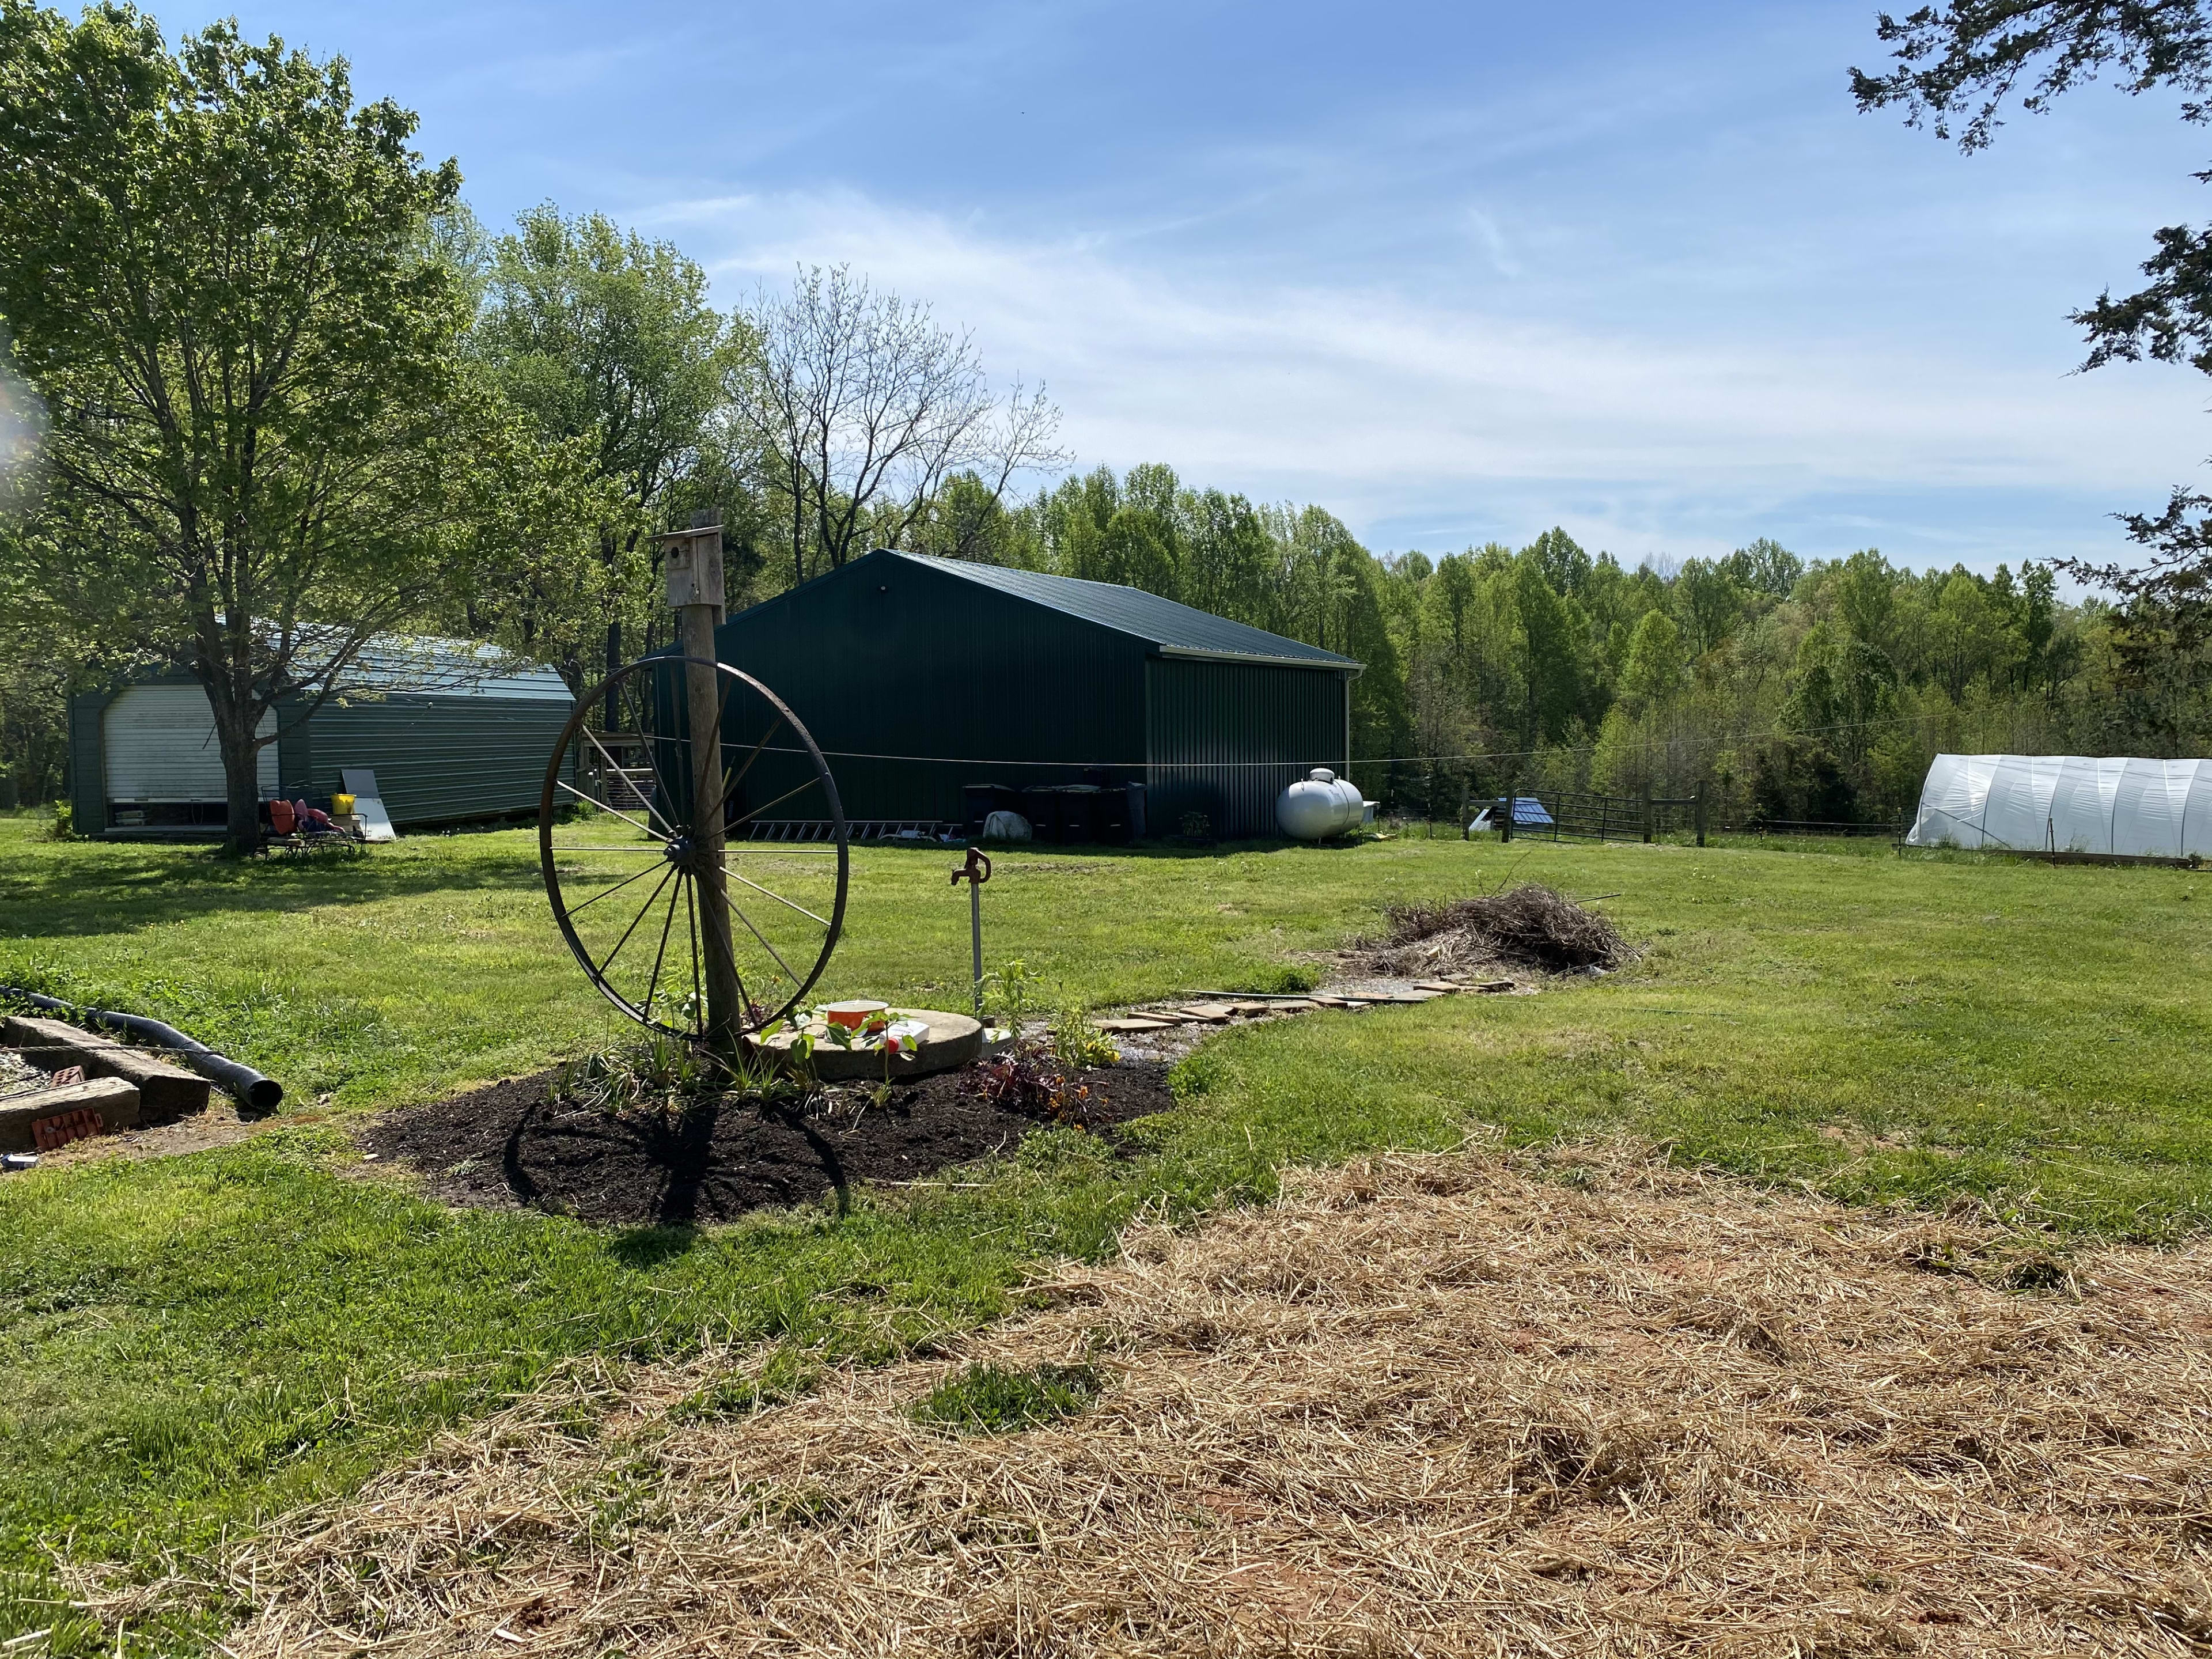 Camping at Cloverdale Farms